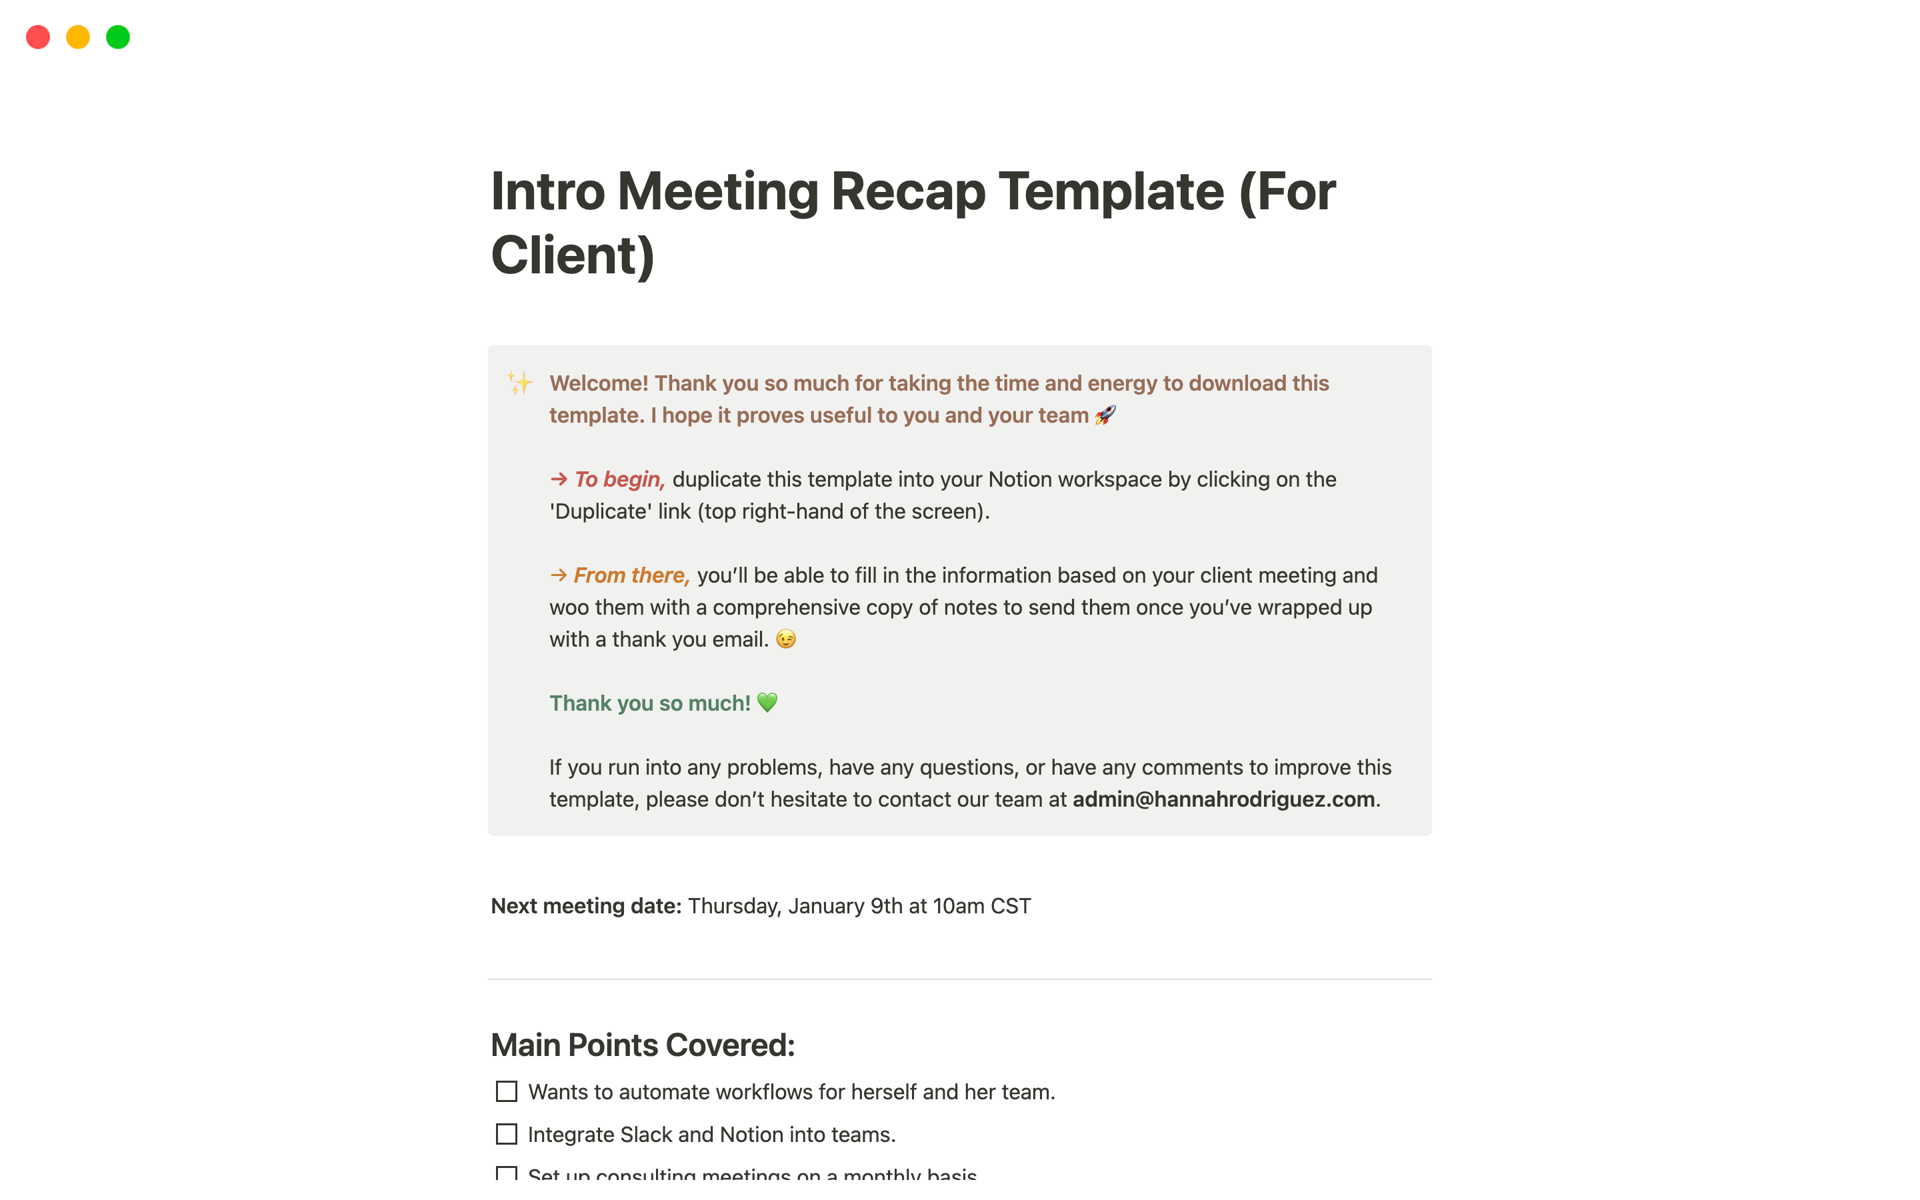 A template preview for Intro Meeting Recap (For Client)